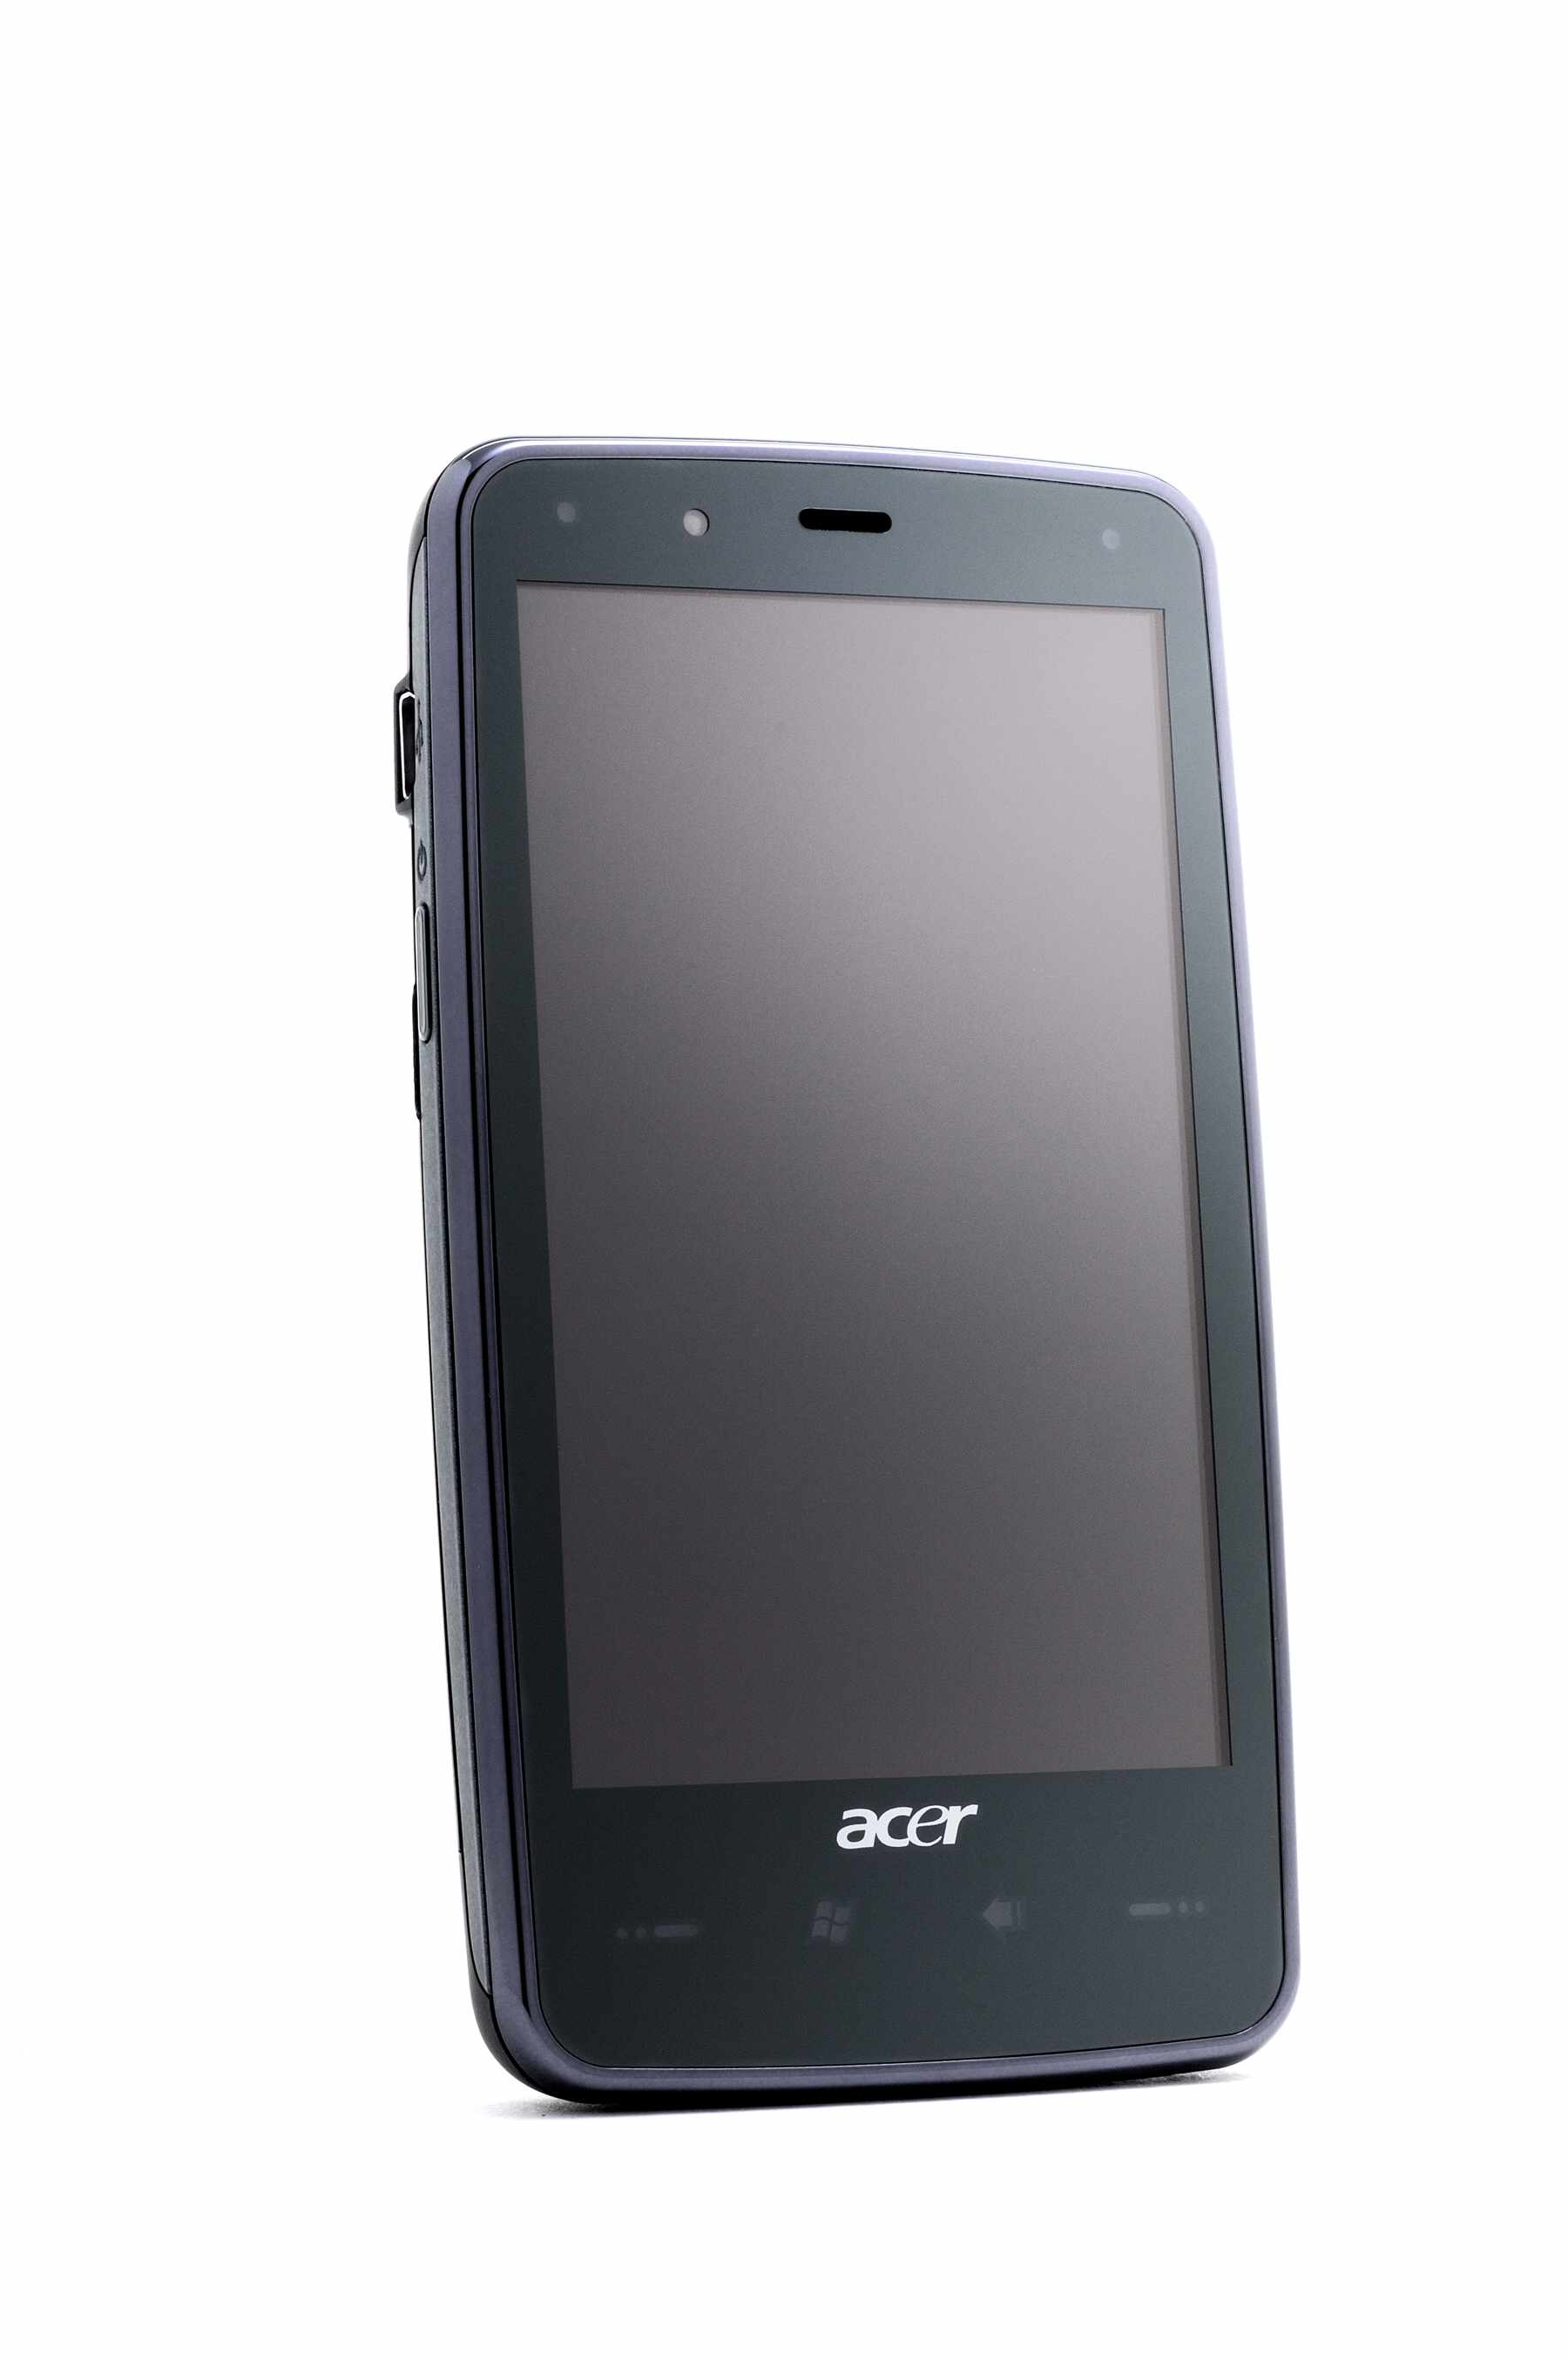 Download this Acer Smartphone Heads picture